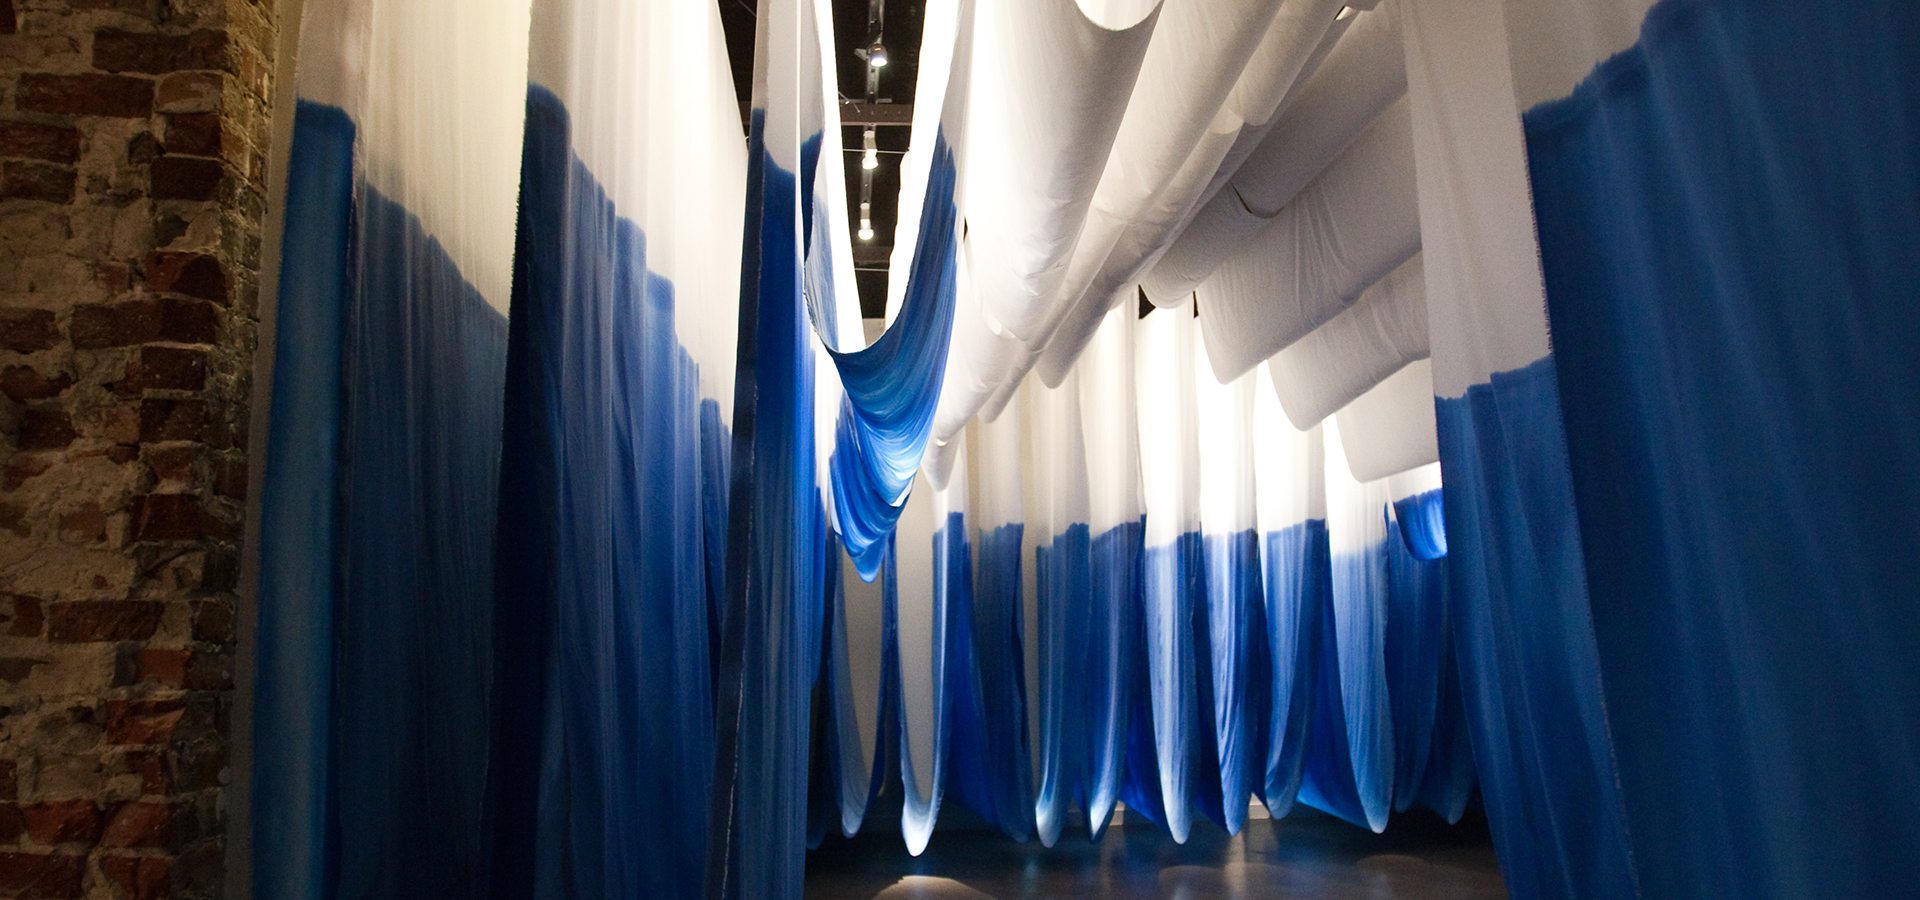 Large draping fabric throughout the museum. Fabric is white on top and blue on the bottom.